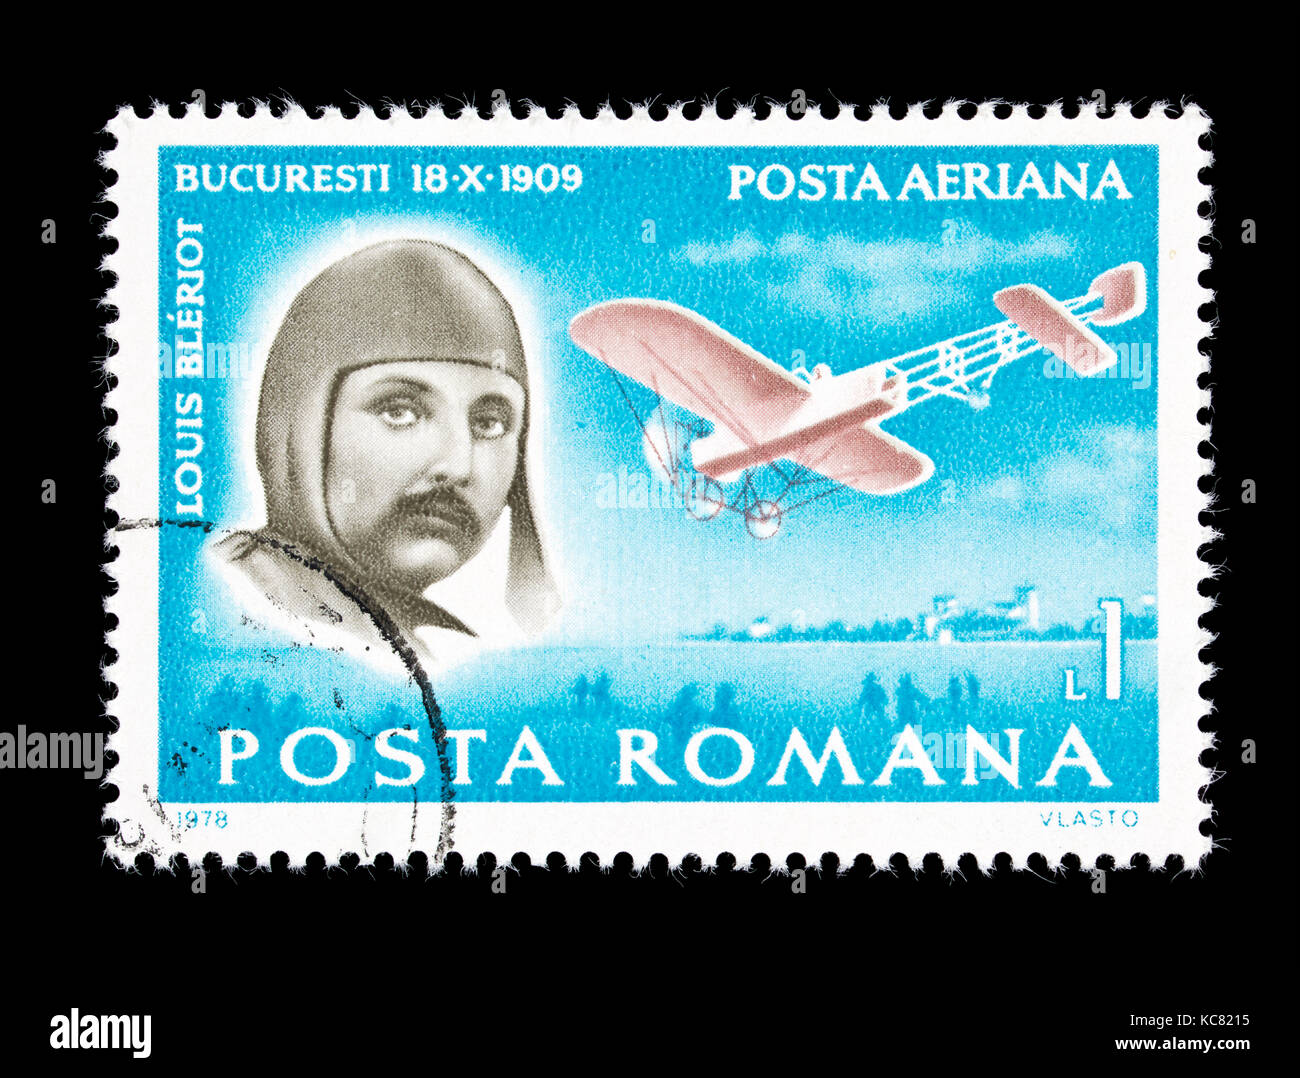 Postage stamp from Romania depicting Louis Bleriot and his first flight over the English Channel. Stock Photo